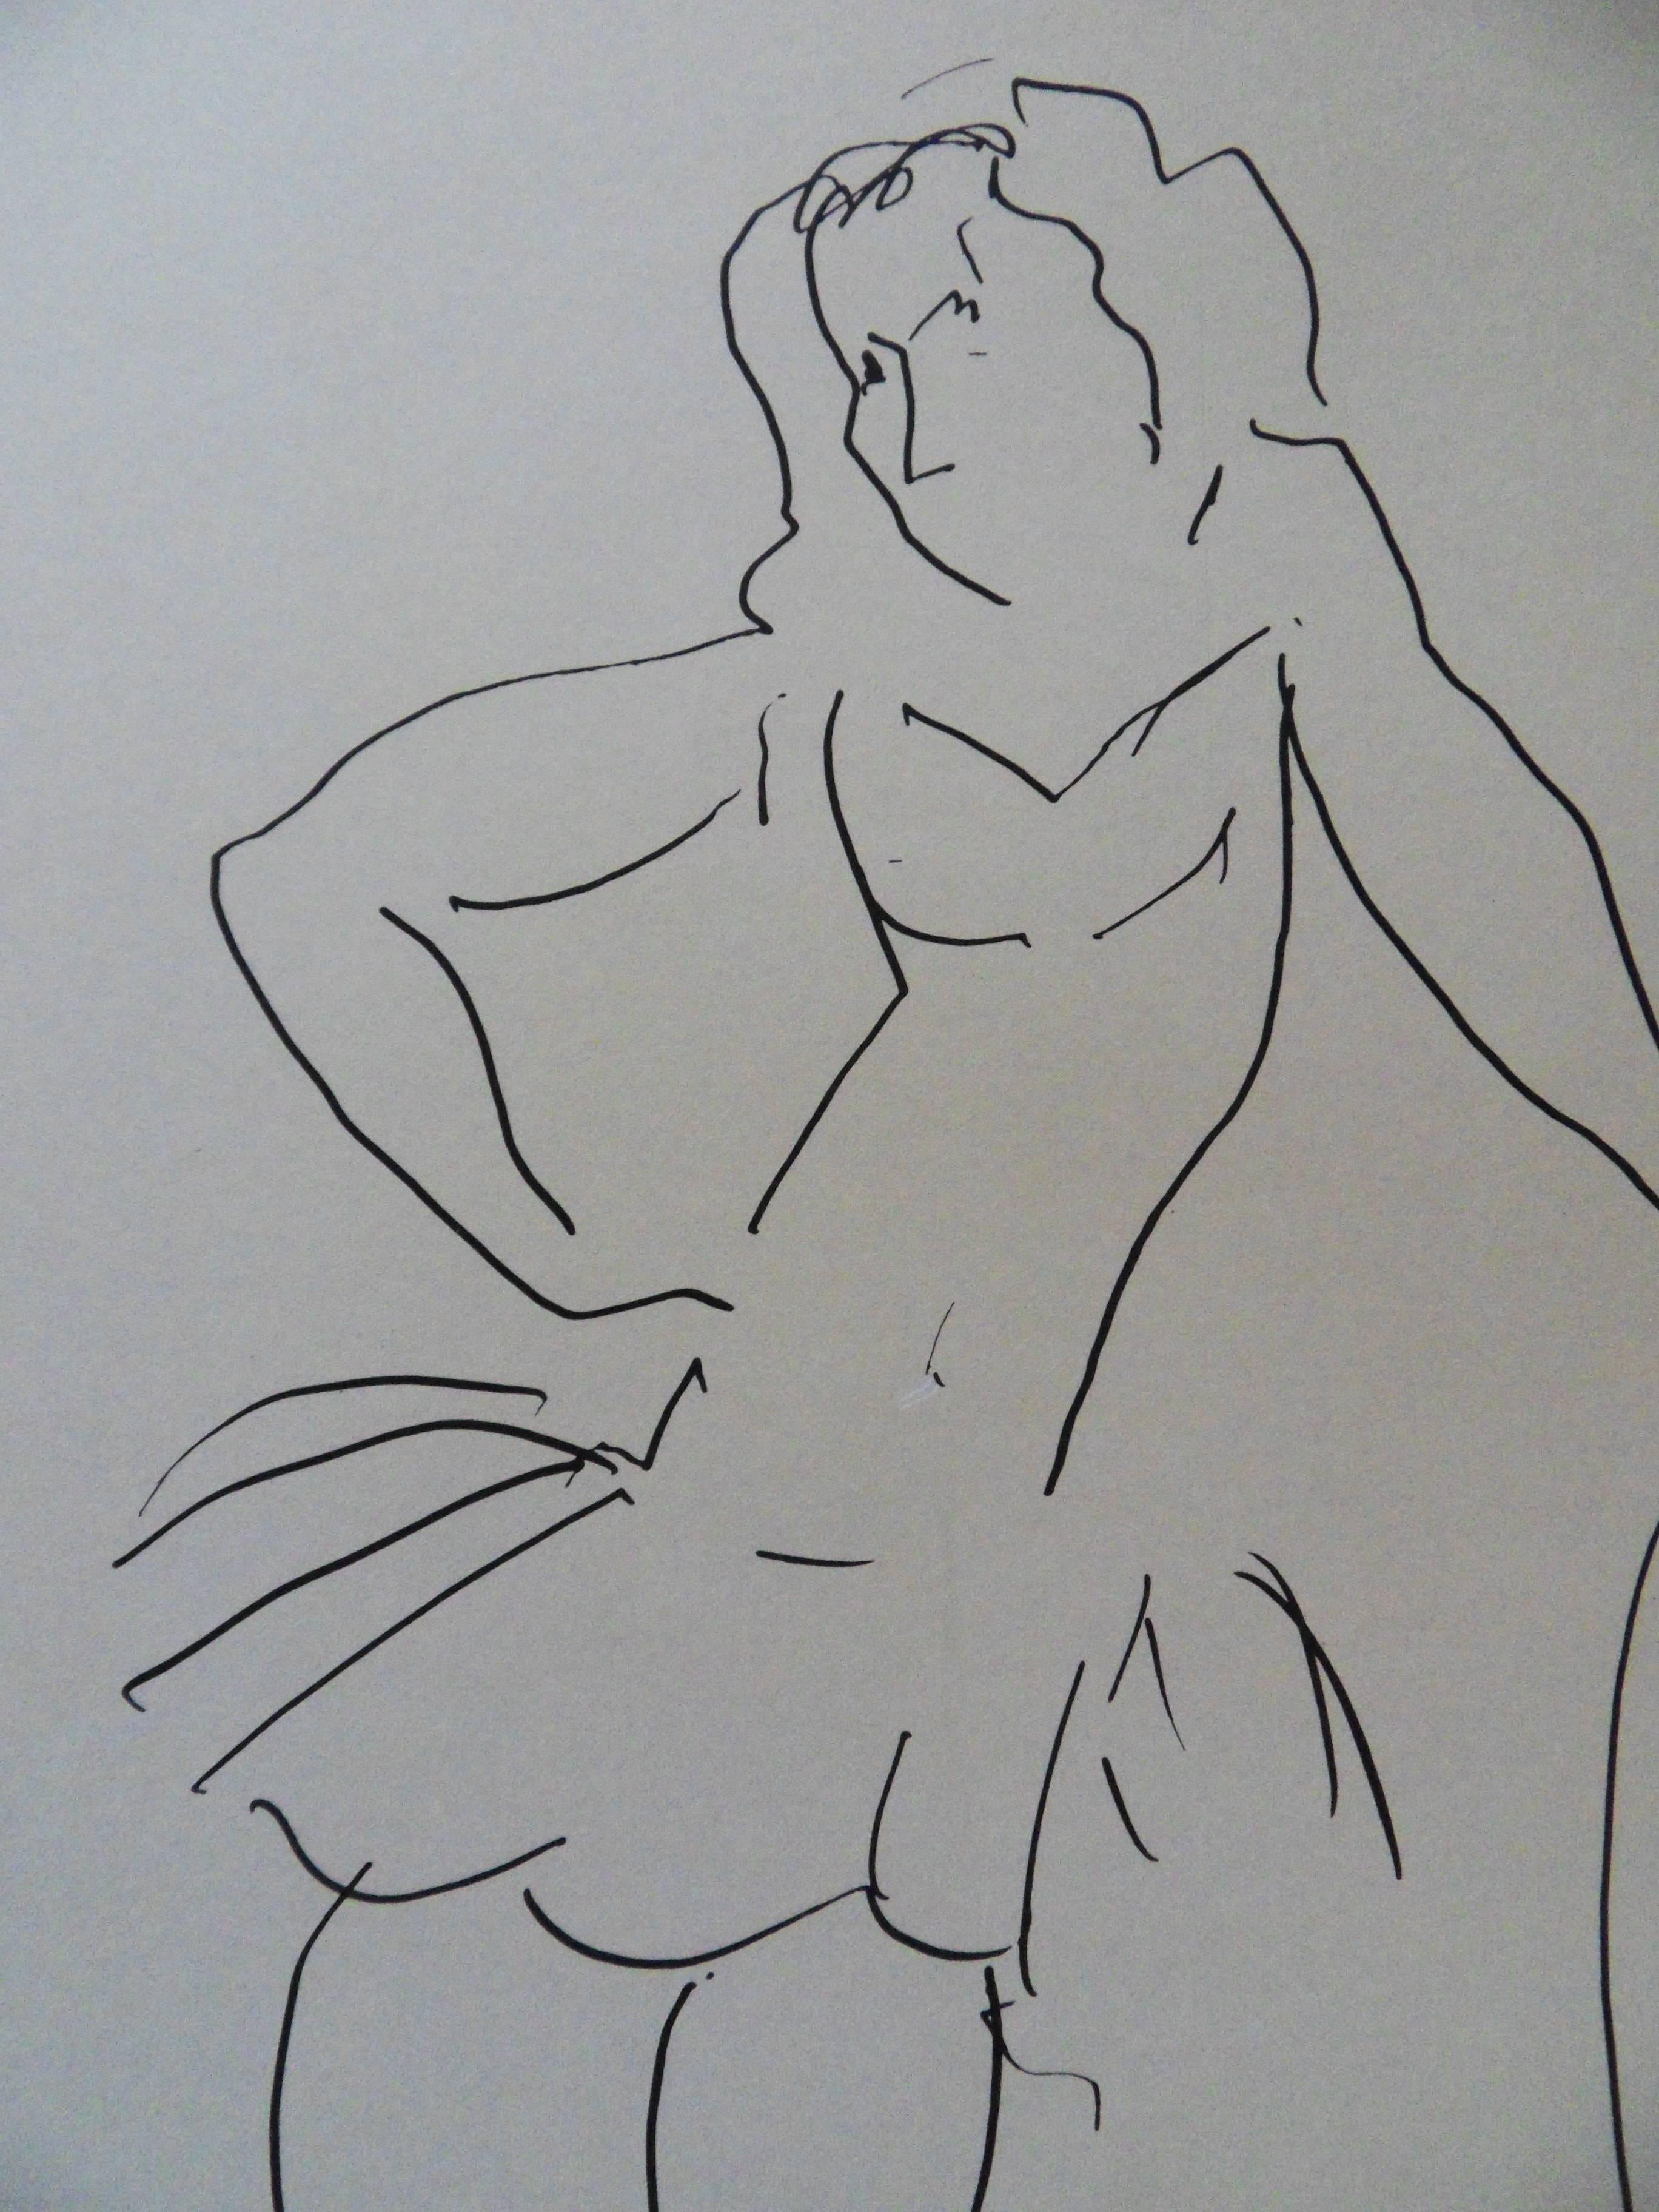 Henri MATISSE (after)
Christiane - Dancer, 1980

Lithograph printed in MOURLOT studios
Printed signature in the plate
75 x 50 cm (29 x 20